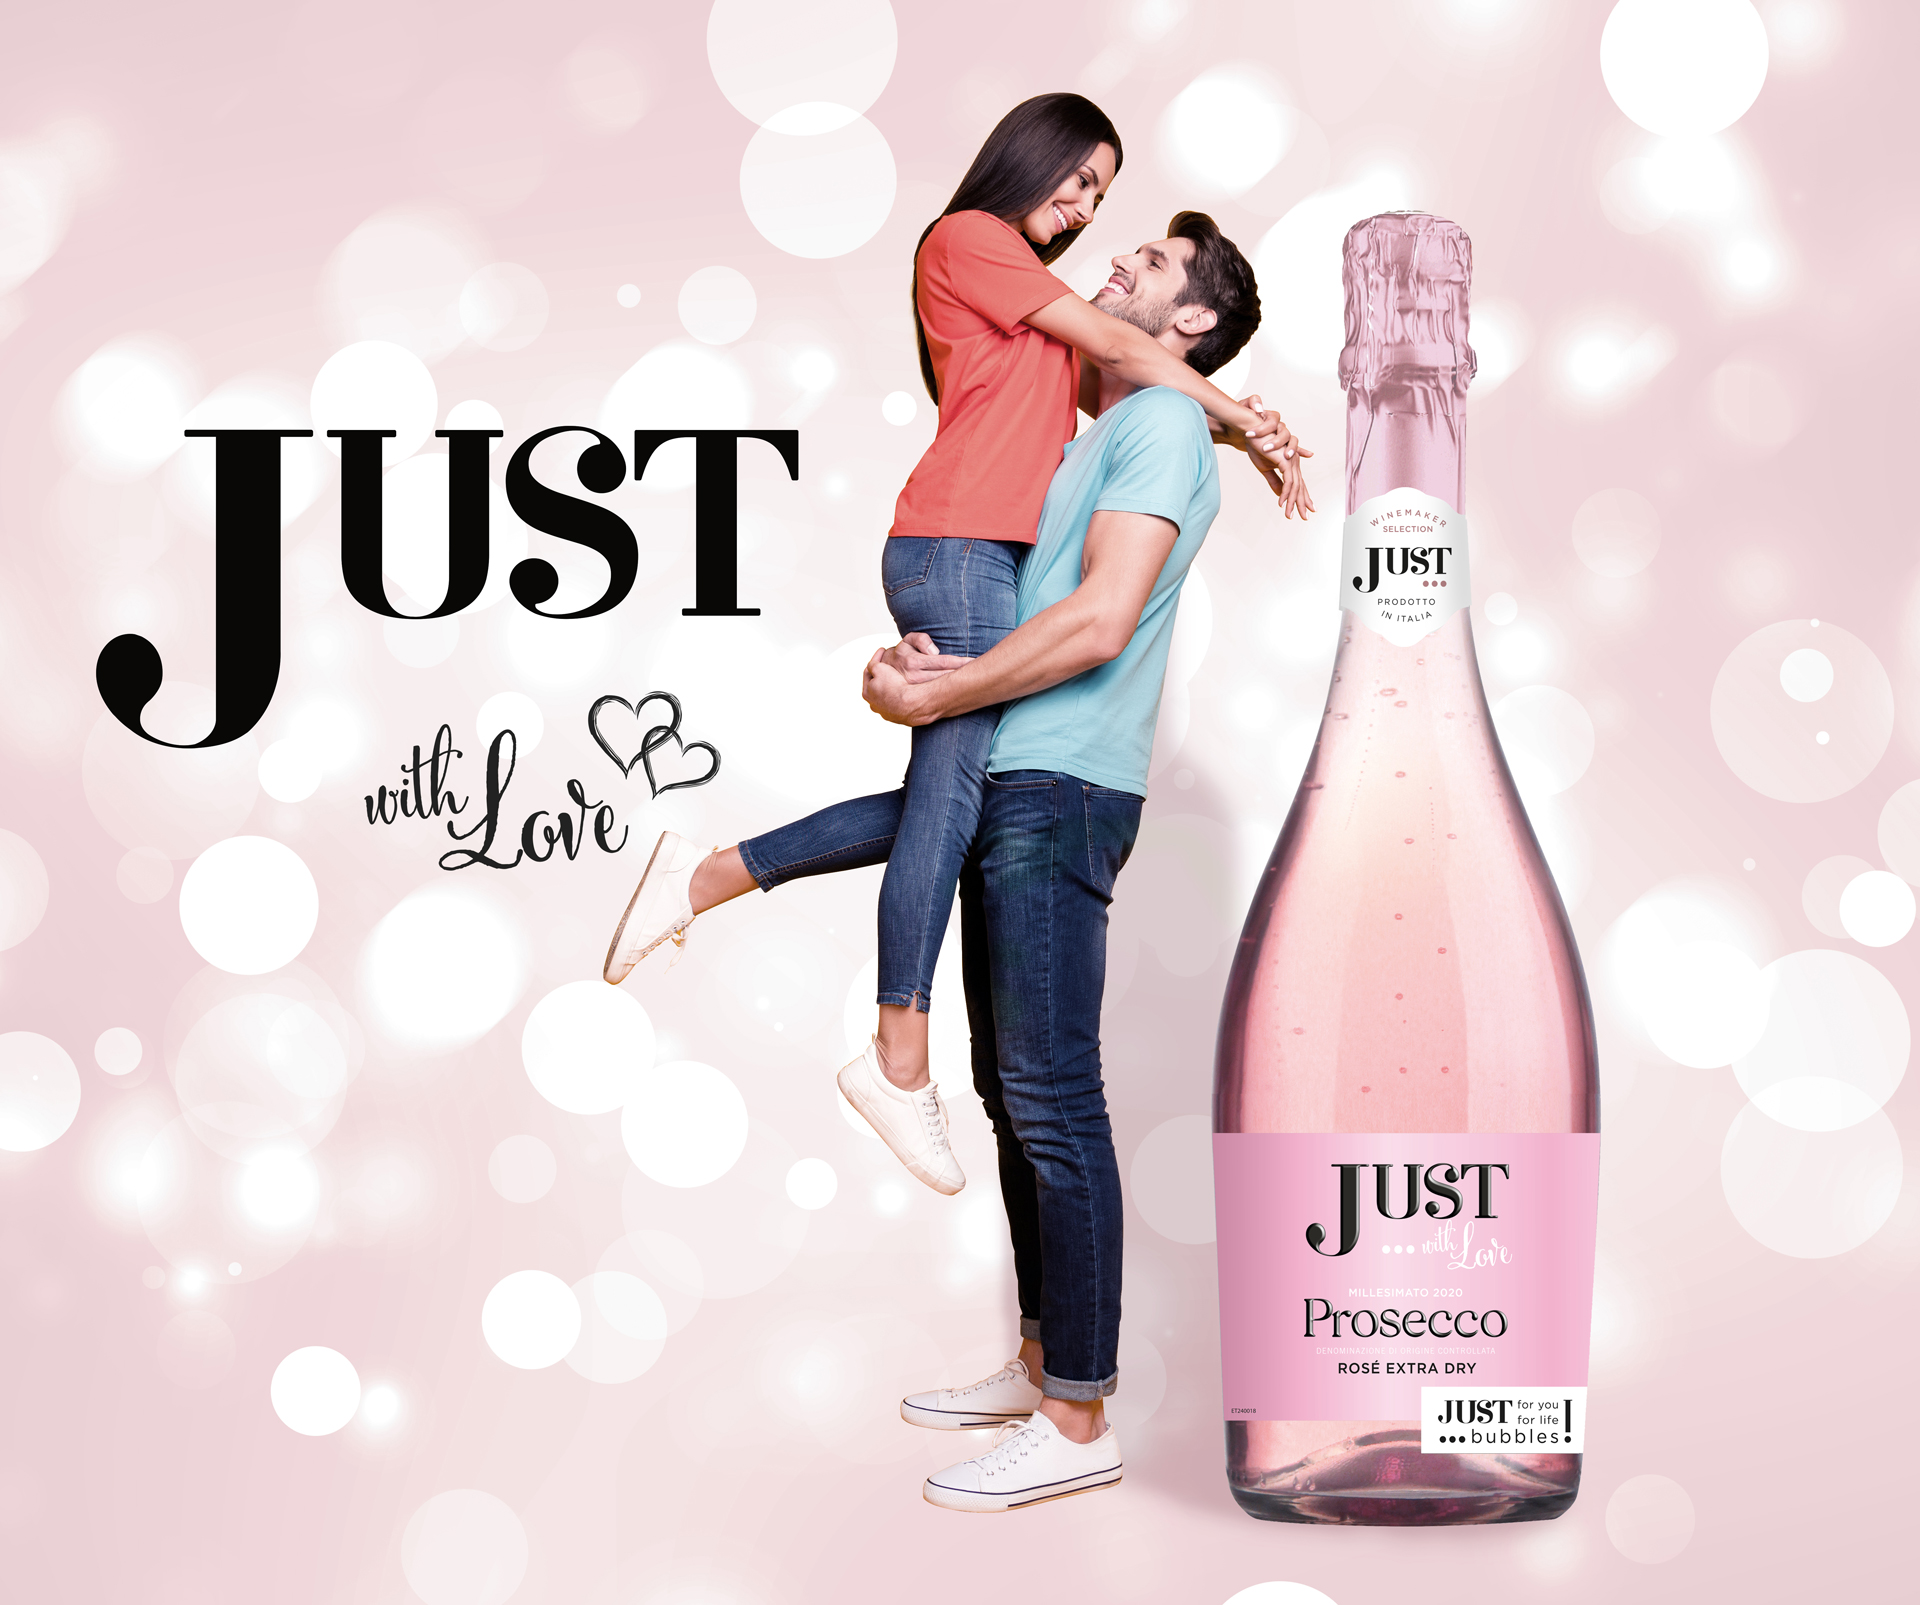 JUST "with love" Prosecco Rose